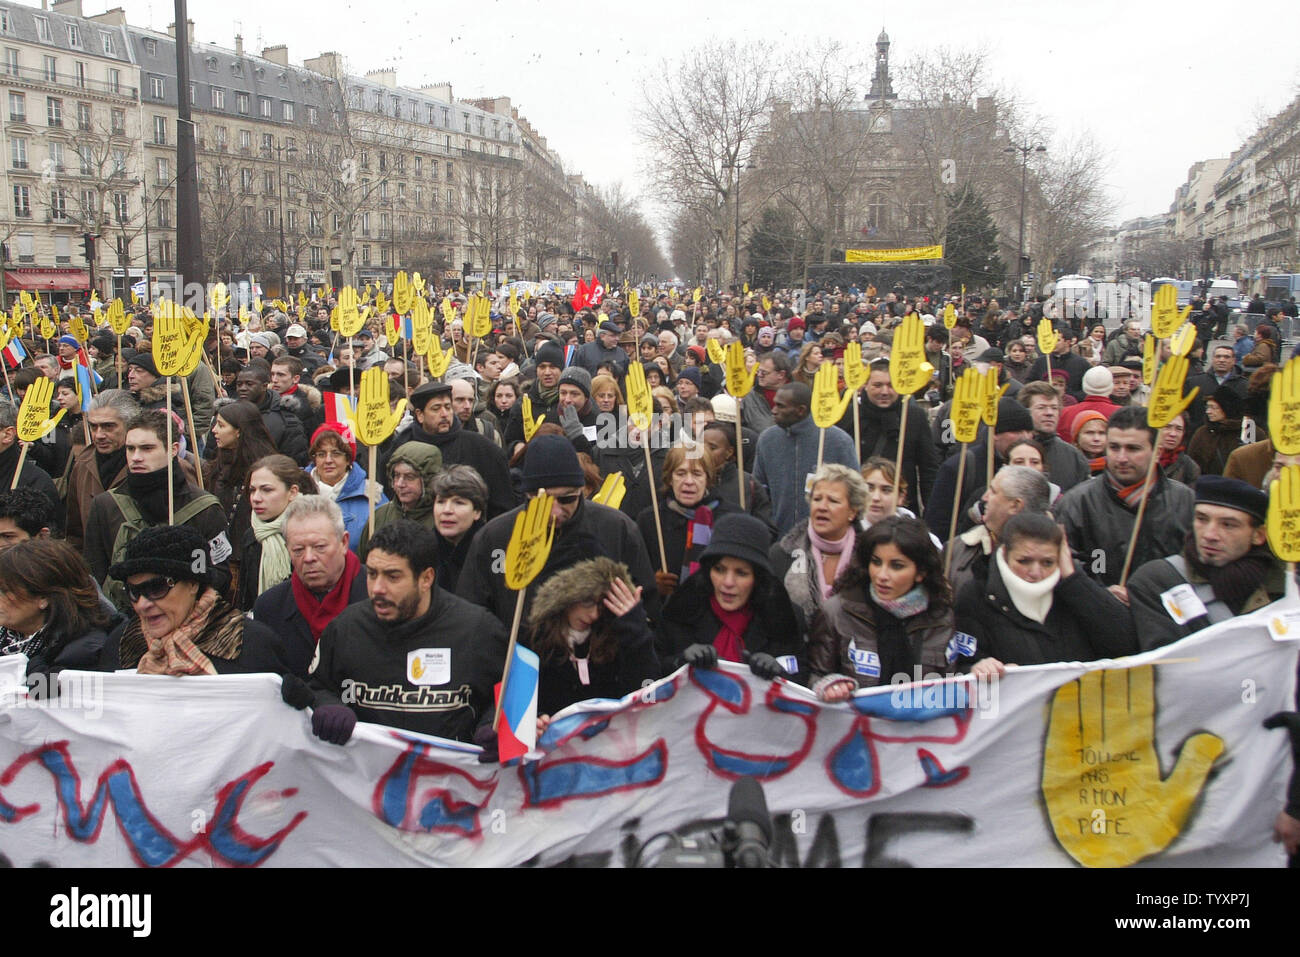 Tens of thousands of people march in homage to Ilan Halimi and against  racism and antisemitism in Paris on February 26, 2006. Halimi, 23, was  kidnaped and tortured to death in a